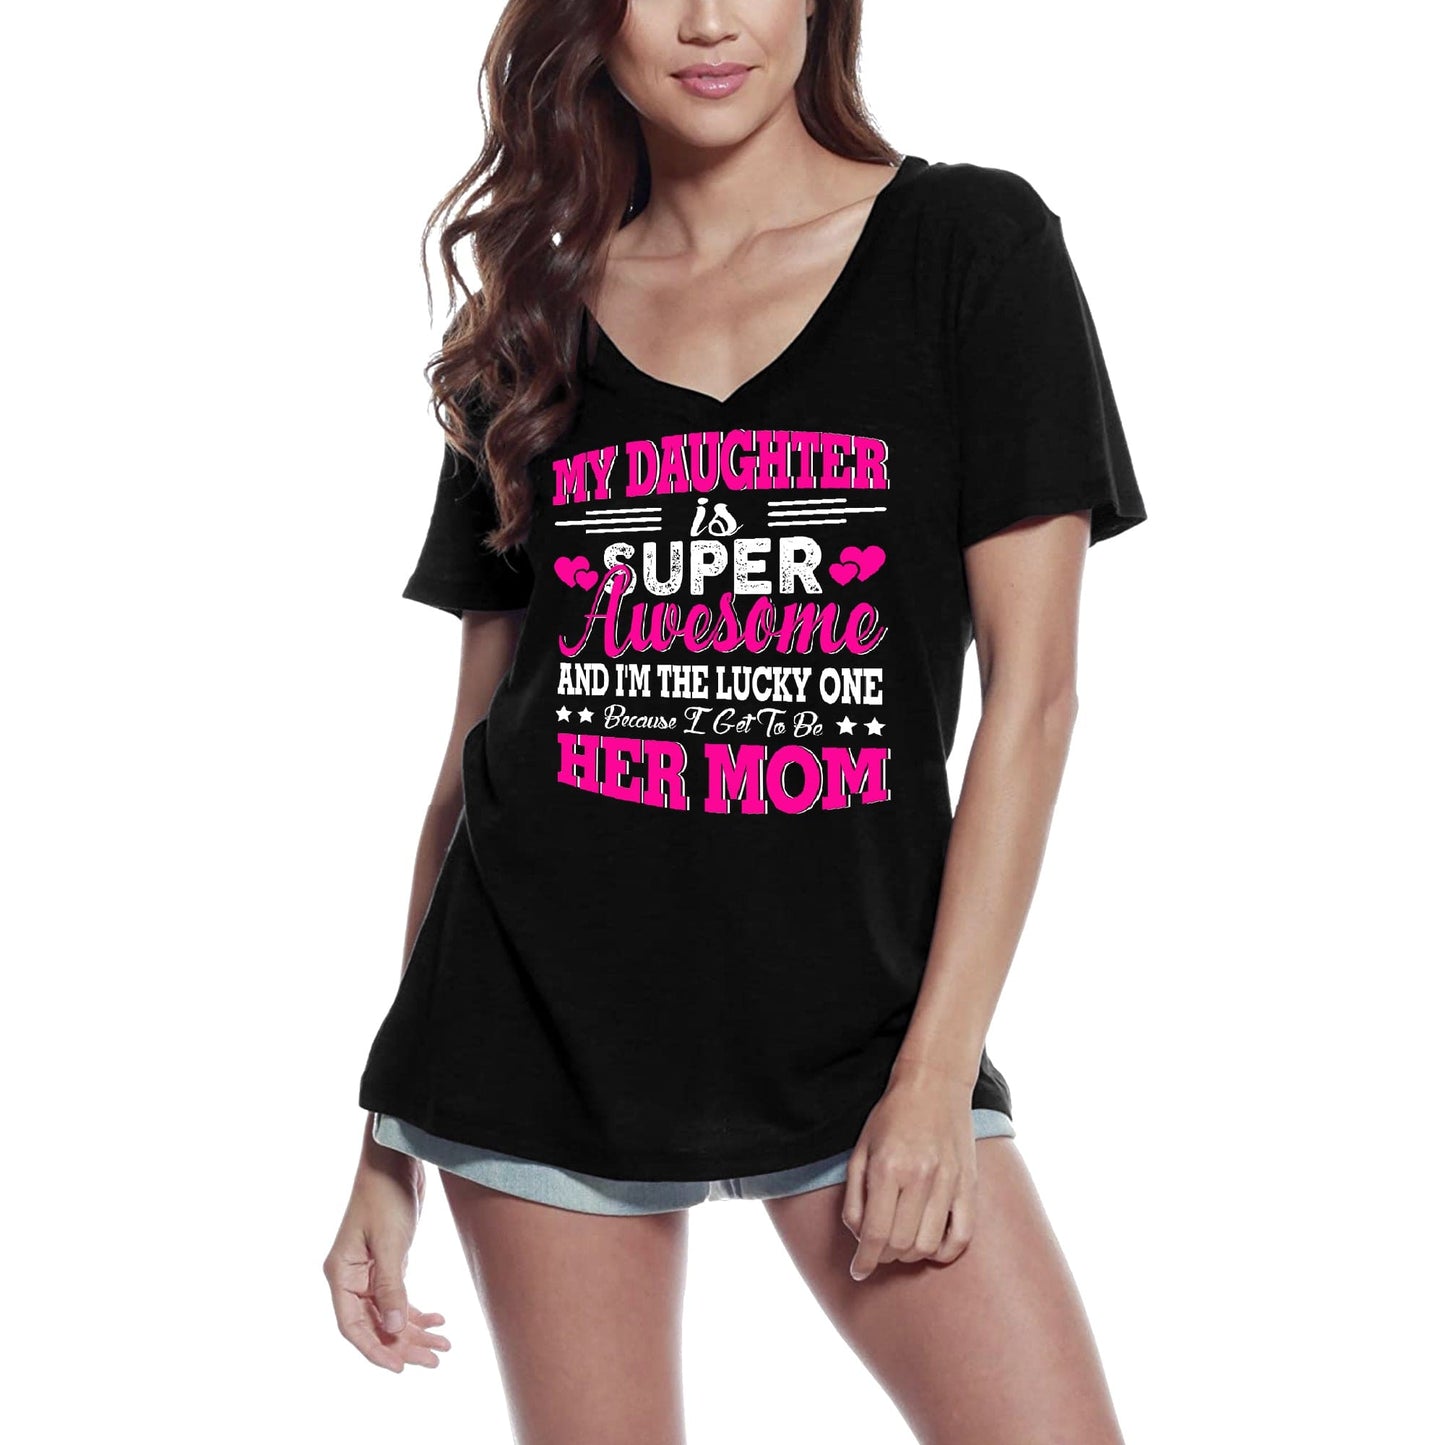 ULTRABASIC Women's T-Shirt My Daughter is Super Awesome - Mom Short Sleeve Tee Shirt Tops